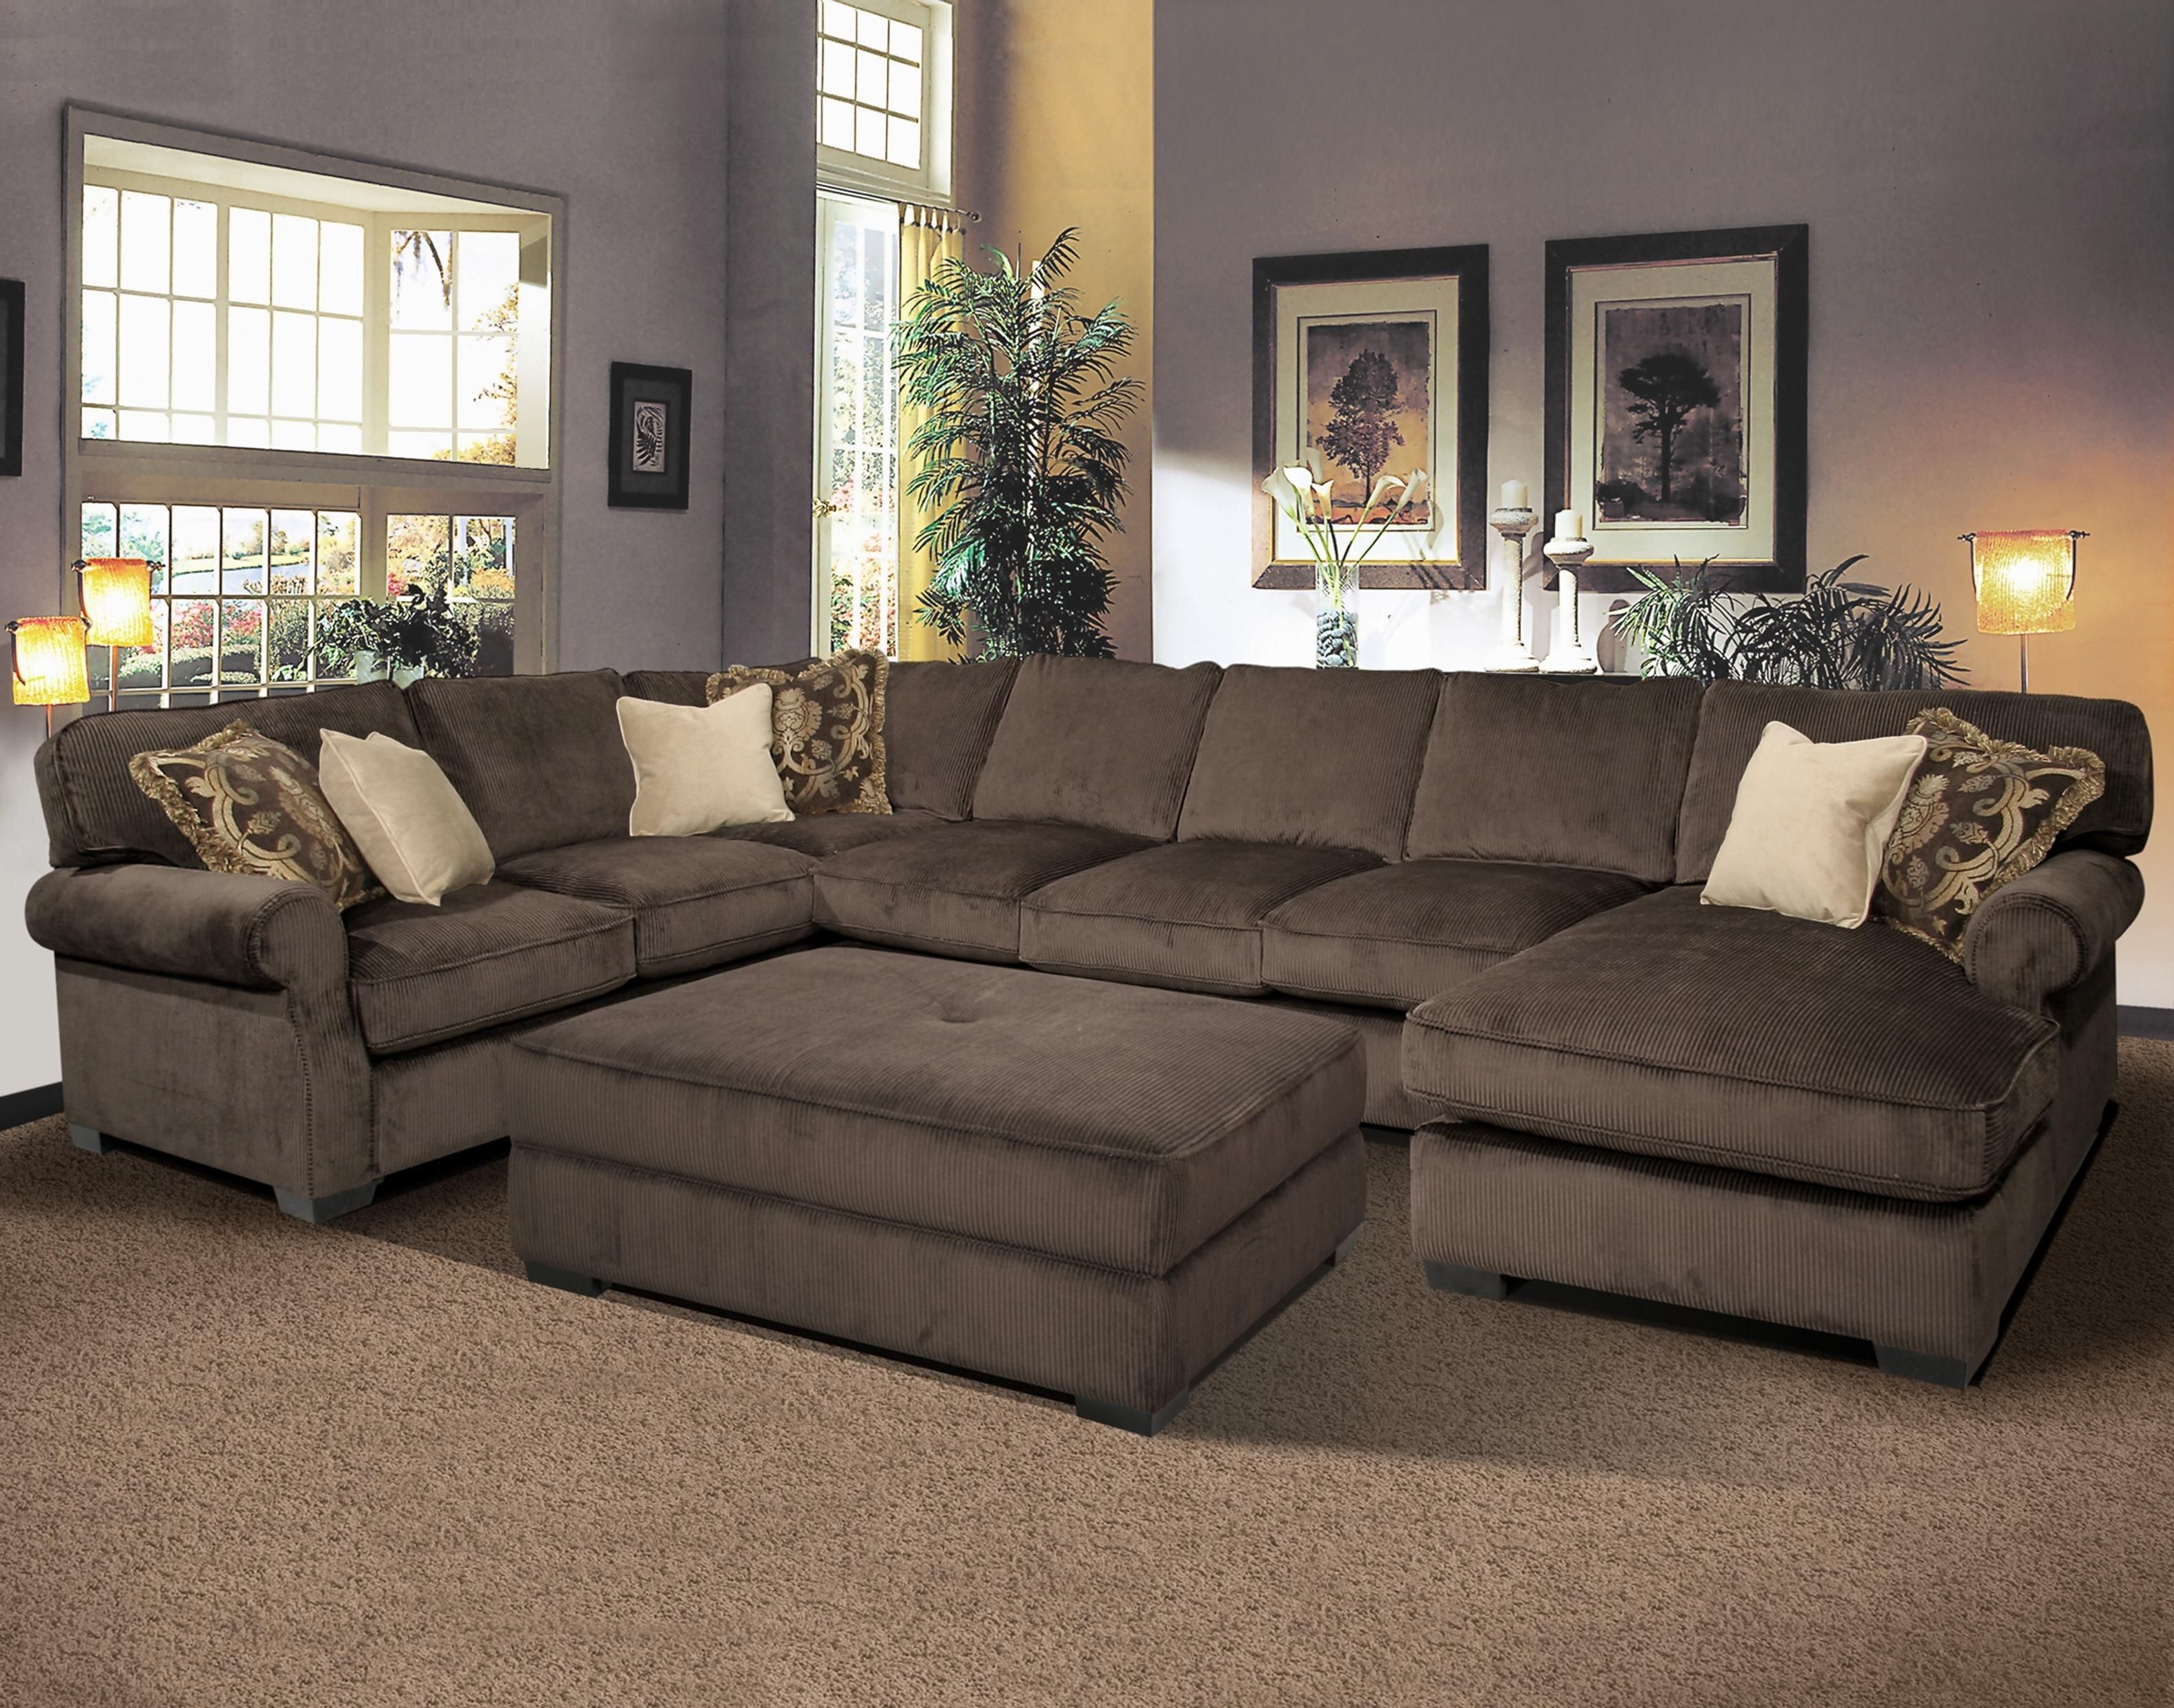 2018 Sectional Couches With Large Ottoman Intended For Grand Island Oversized Cocktail Ottoman For Sectional Sofa (View 1 of 20)